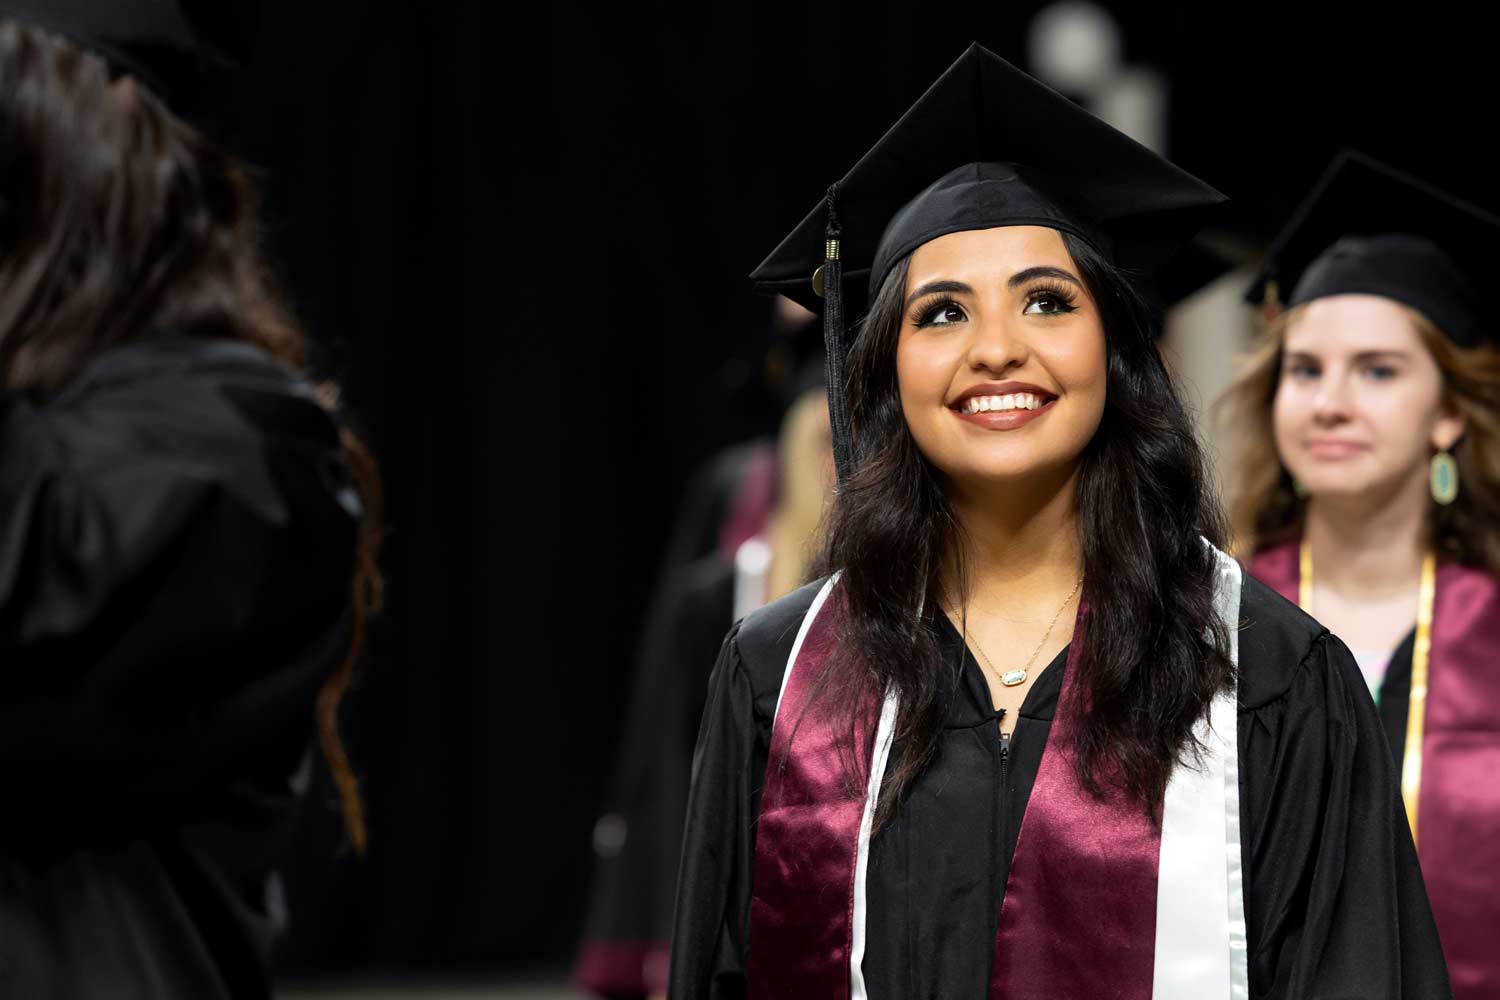 Guided and inspired:' Aggies Elevated graduates first class of